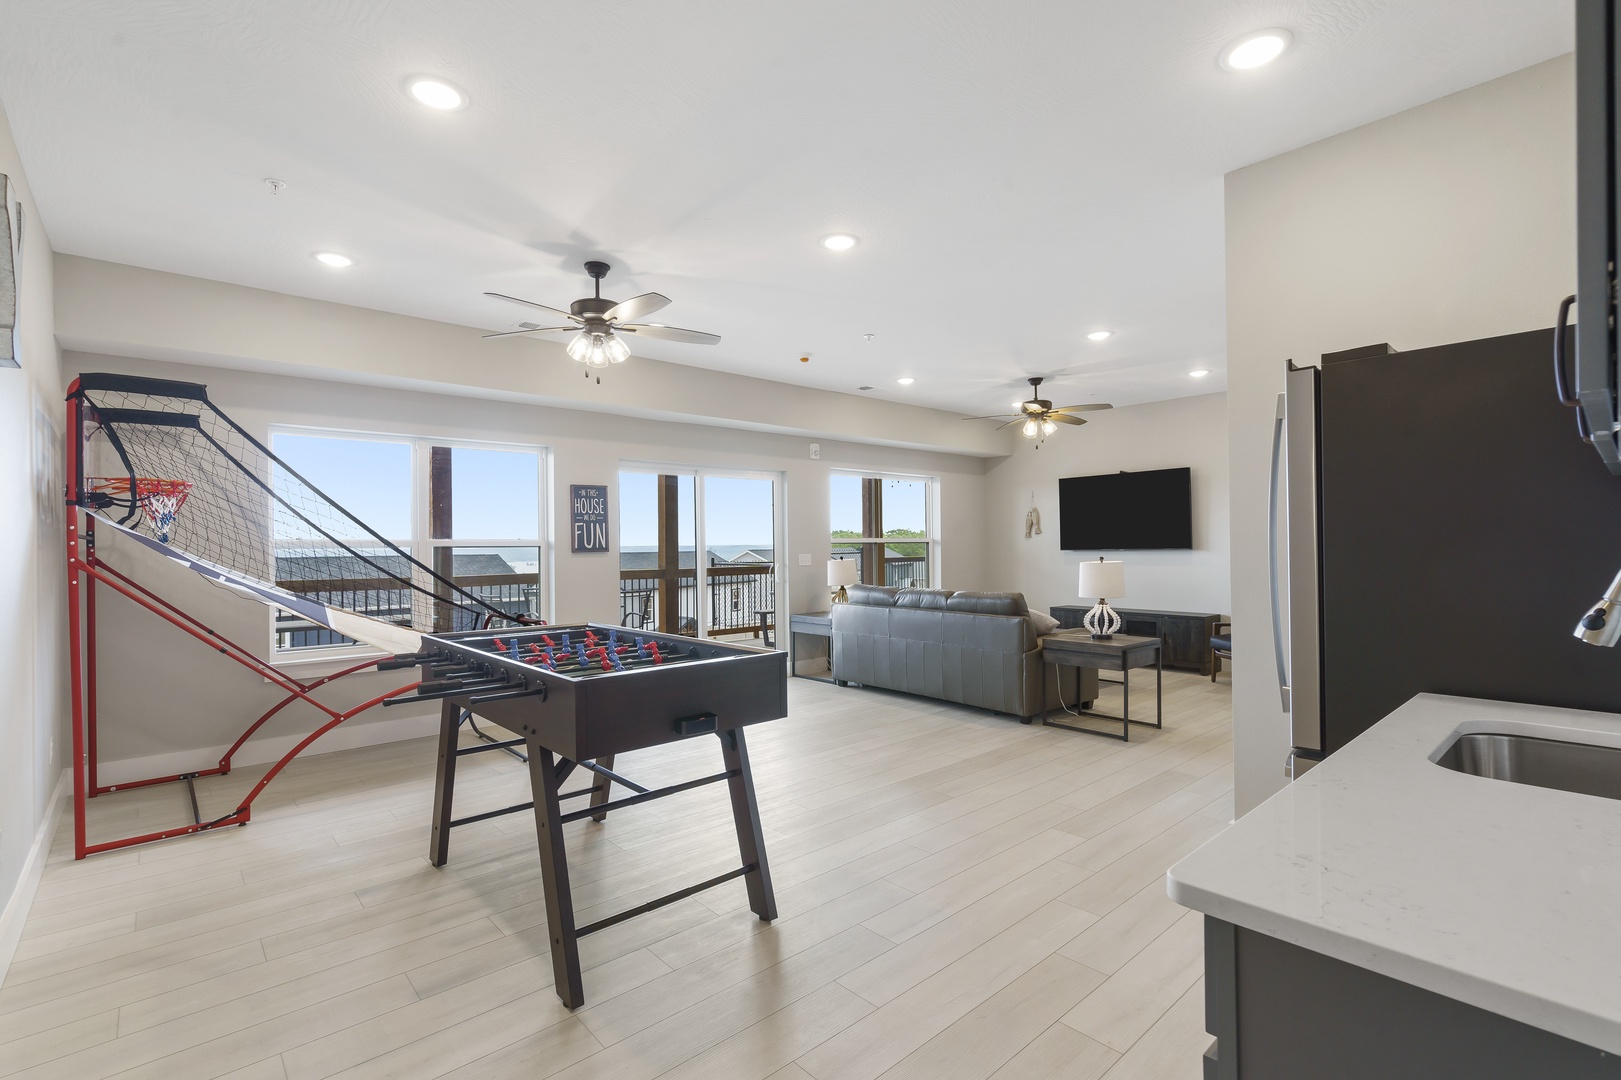 Open space game room to entertain the entire family